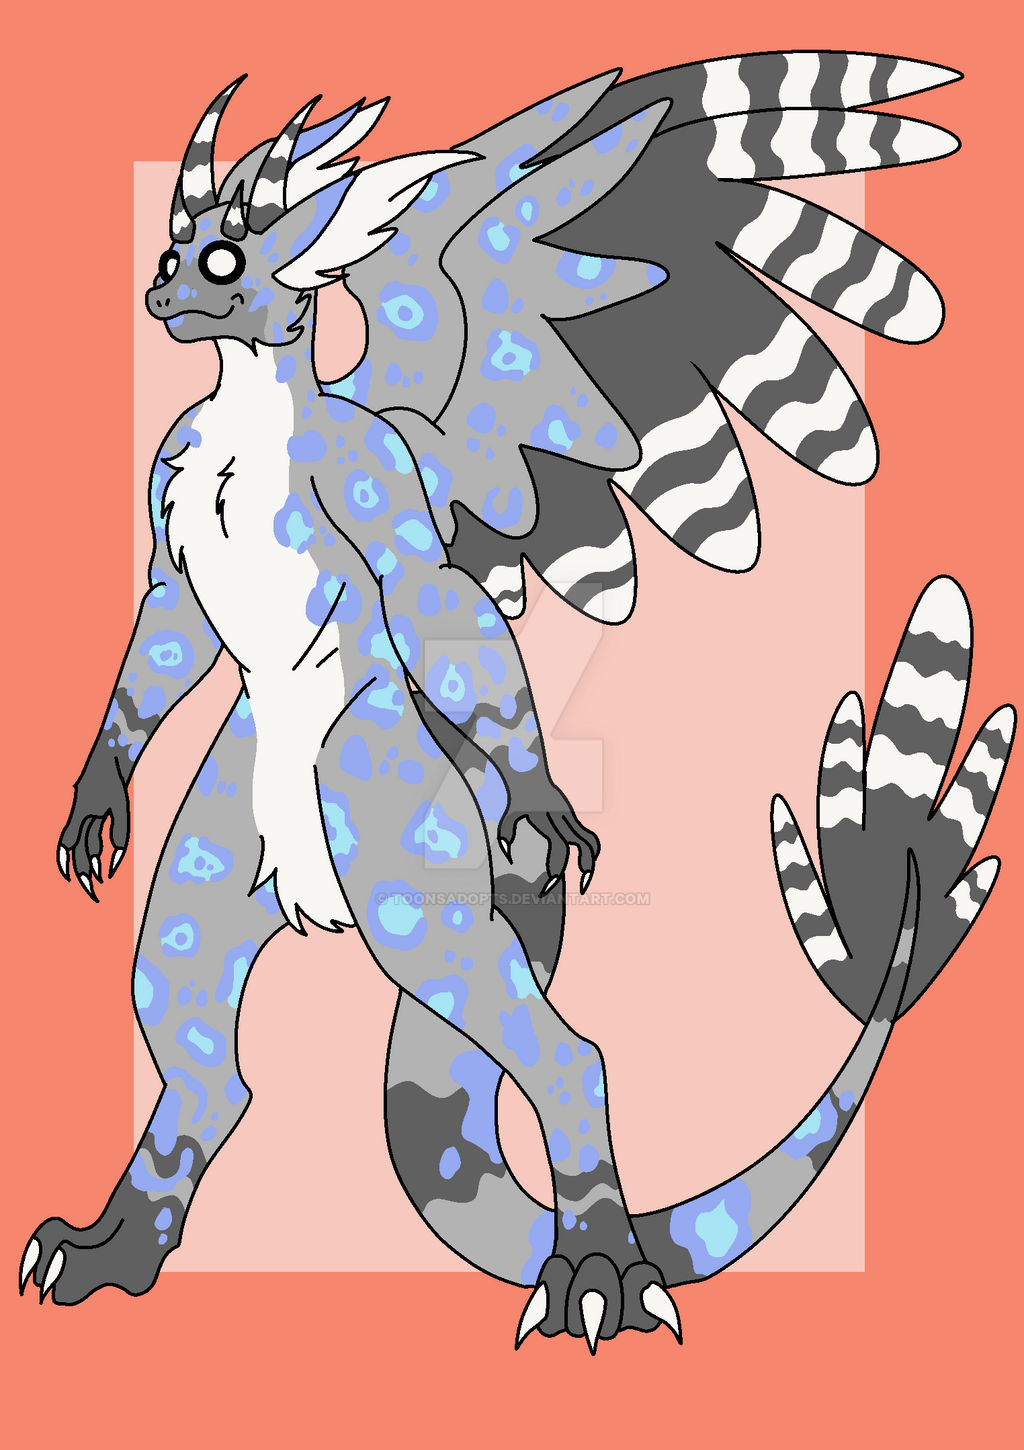 Protogens Adopts 120 each by SparkysCreations on DeviantArt